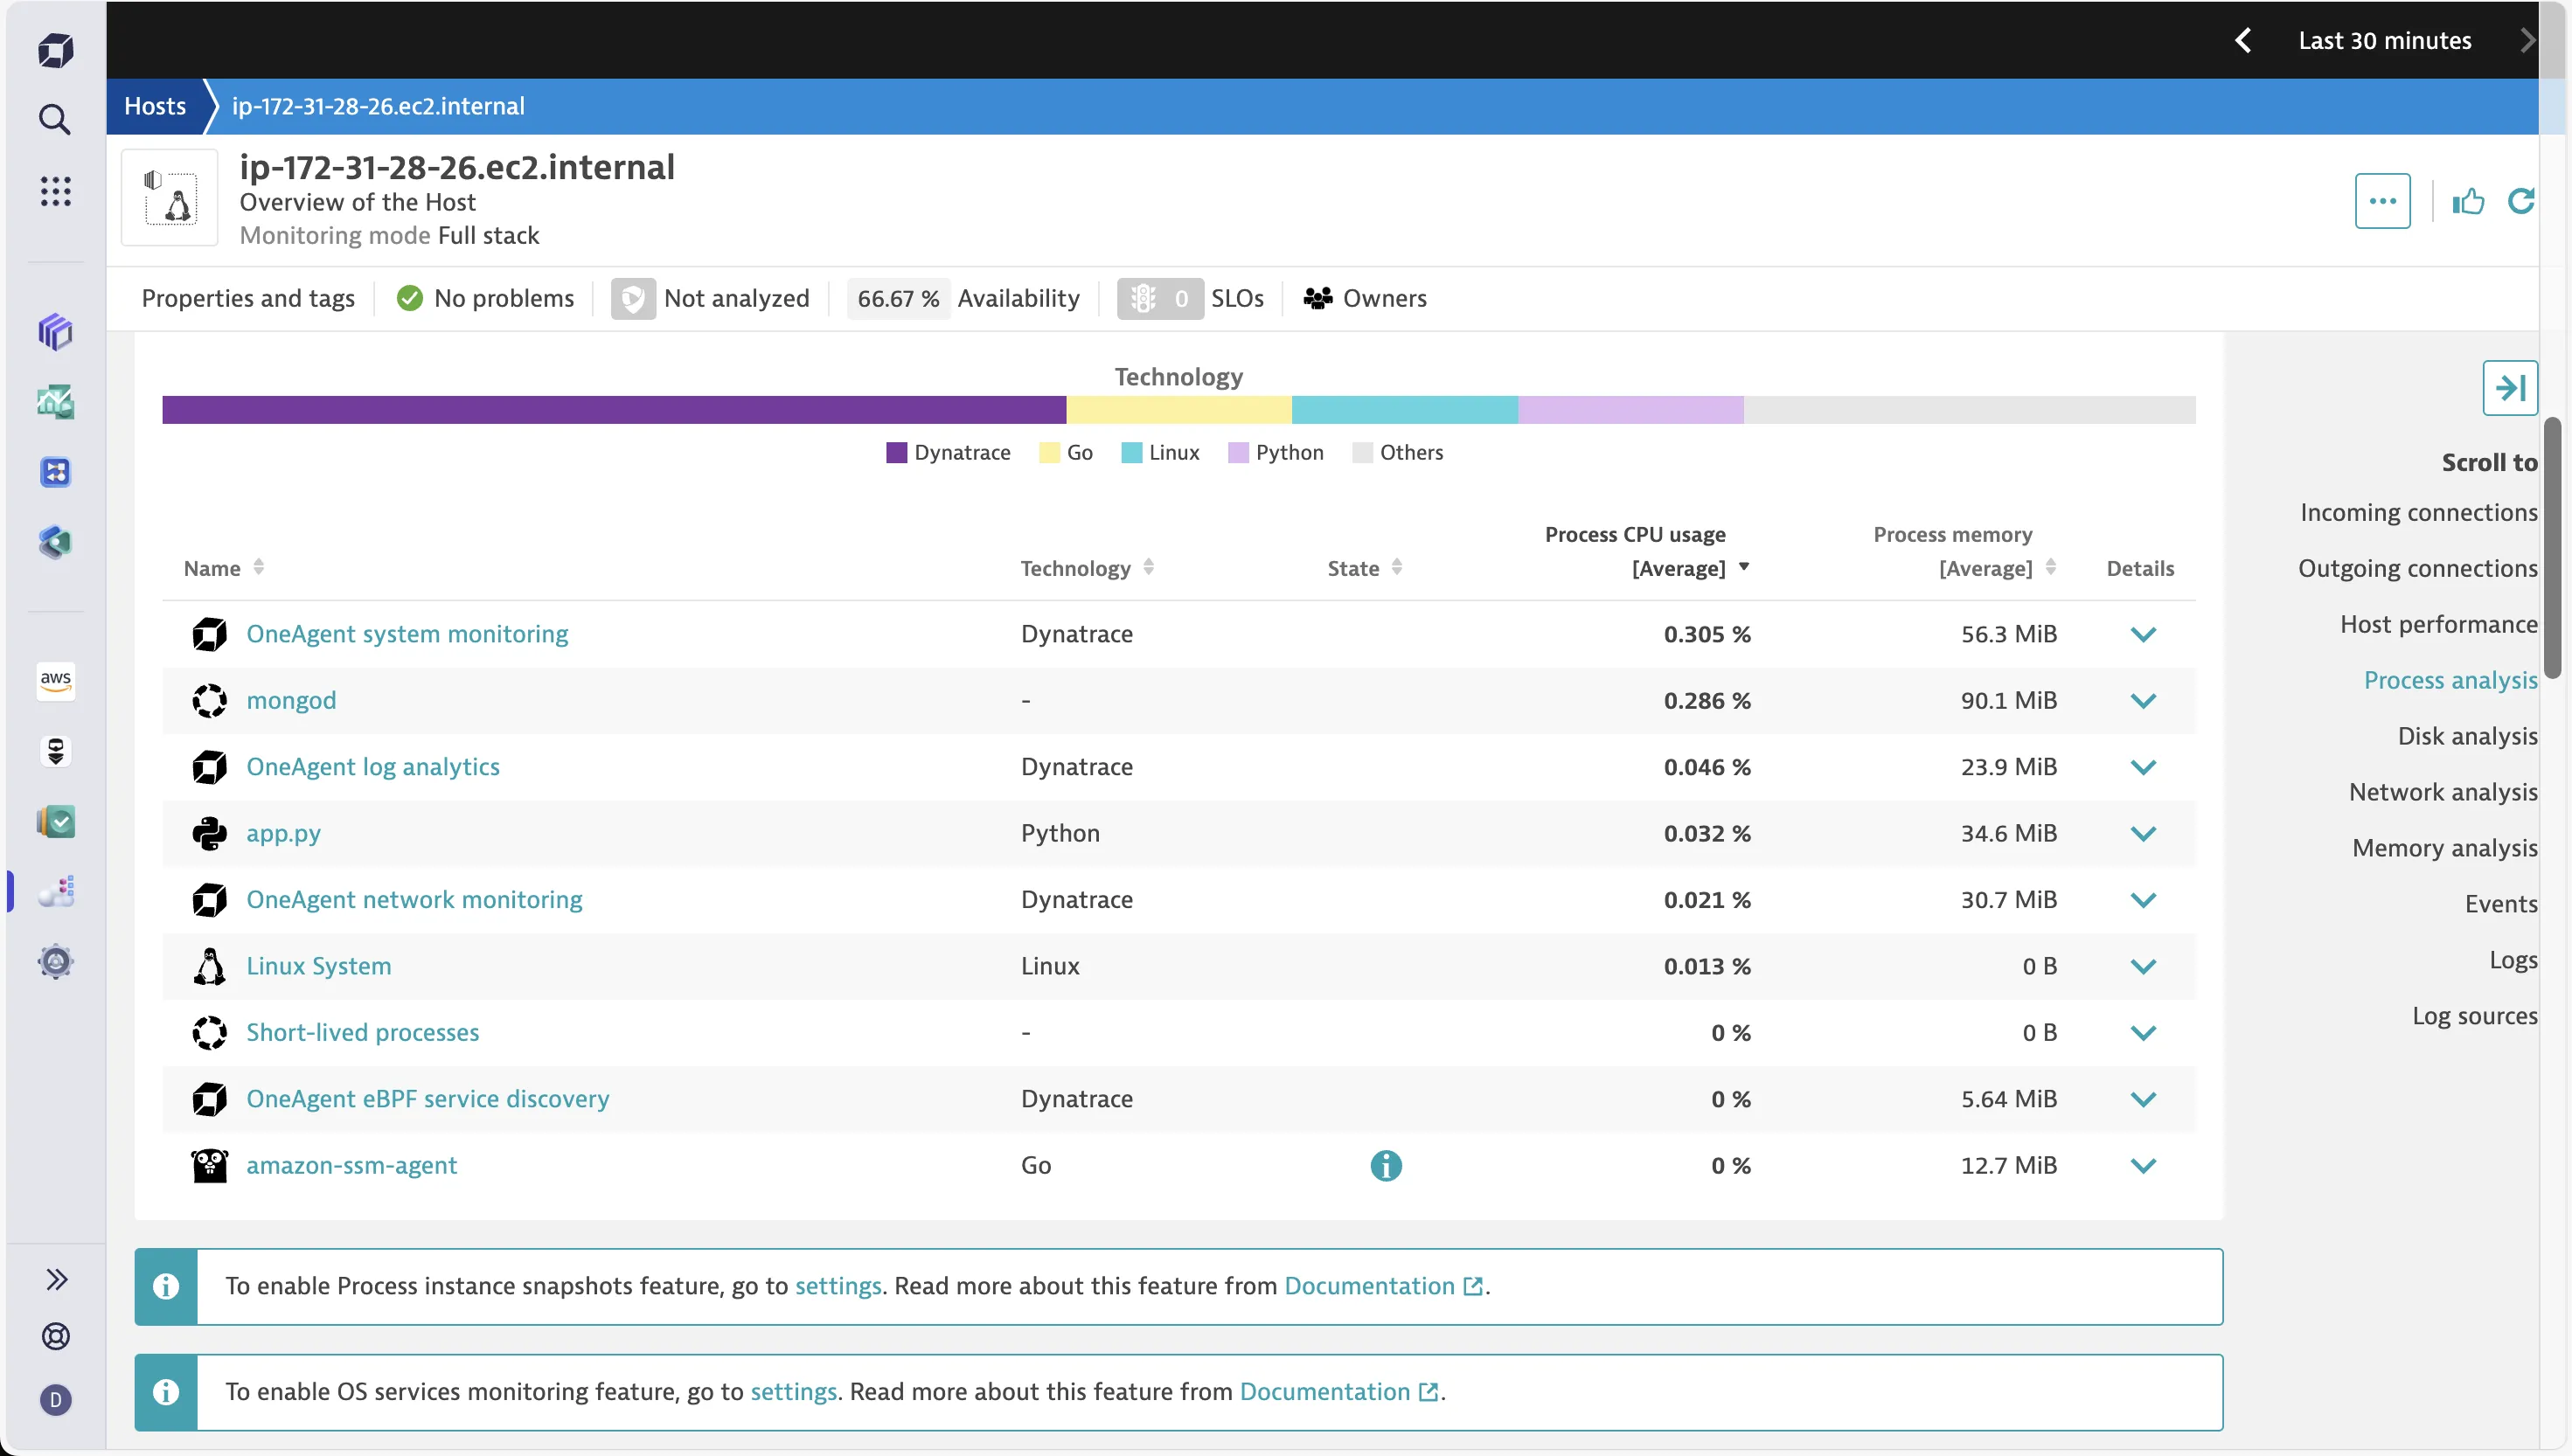 Dynatrace dashboard offers a single view where you can see the Process analysis